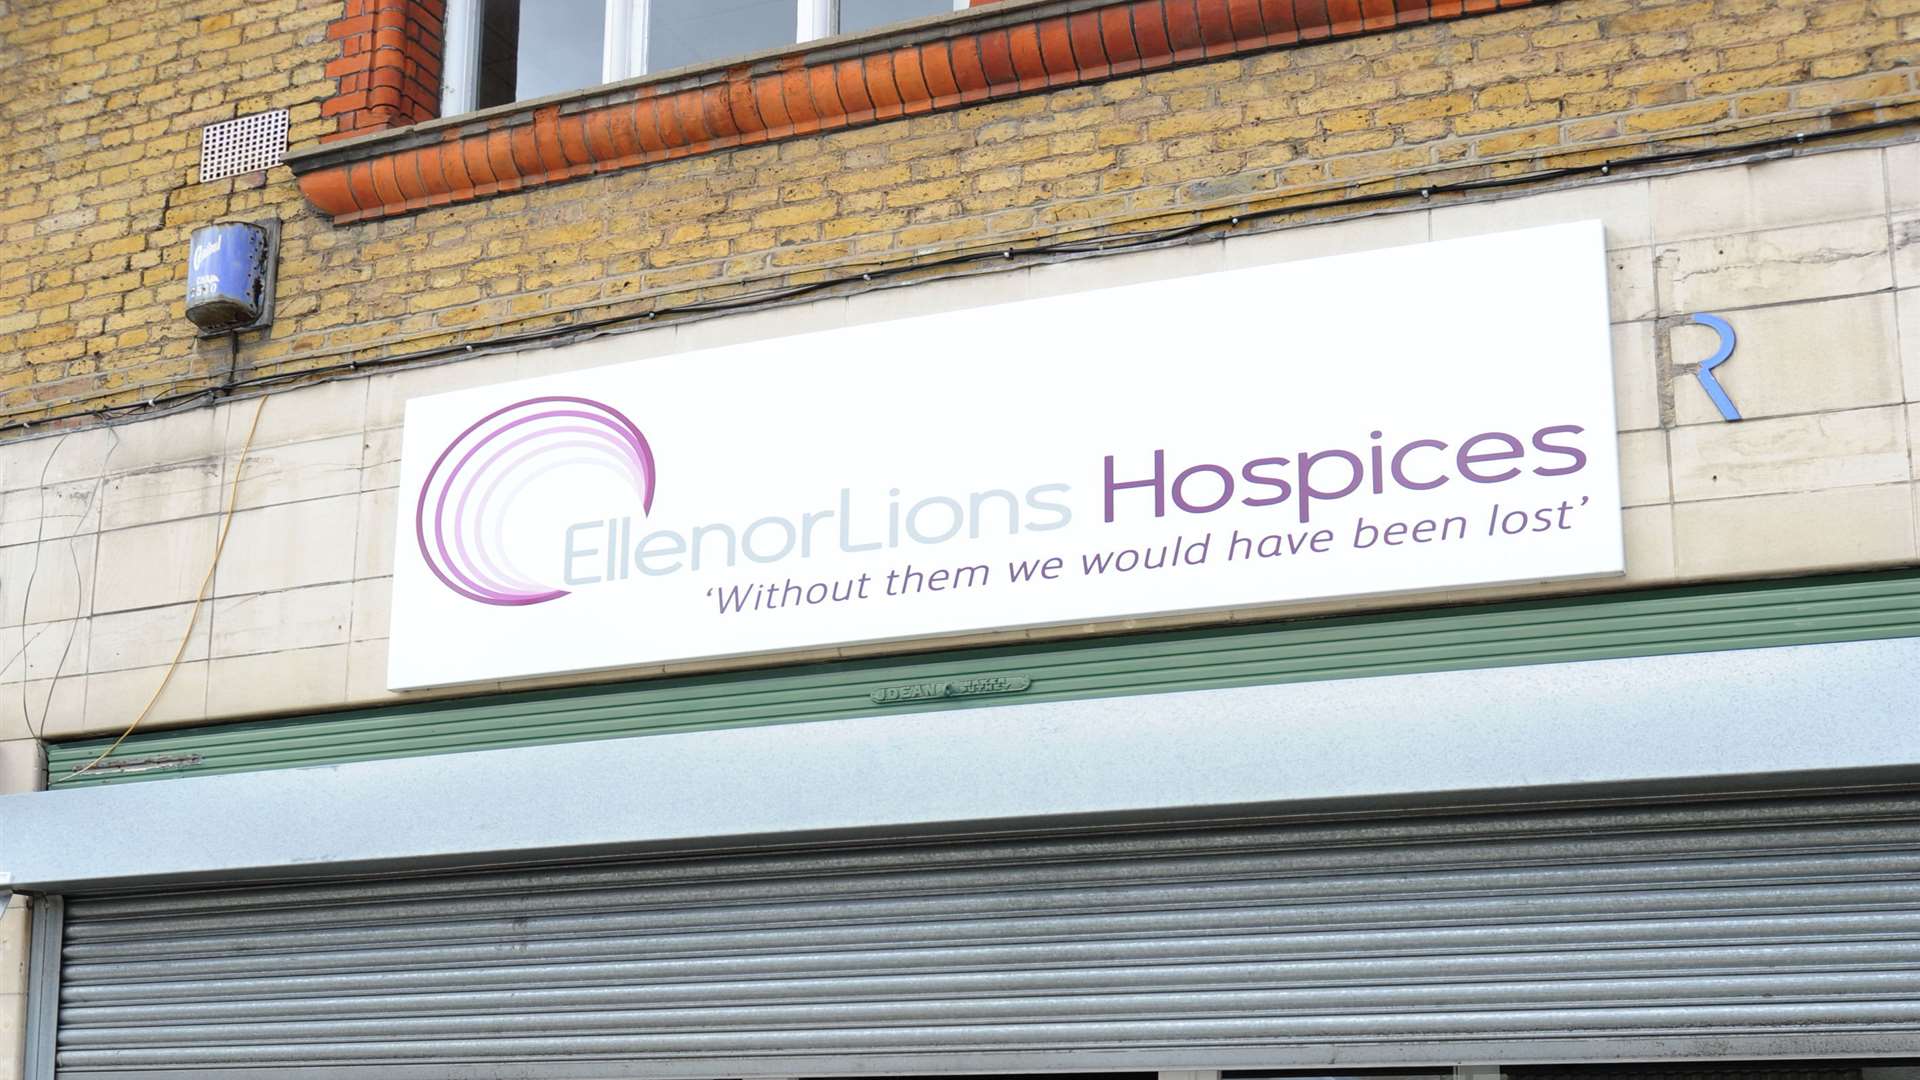 An army bomb disposal unit was called to the EllenorLions Hospice shop, High St reet, Swanscombe, after a donation was handed in with a unexploded shell in it